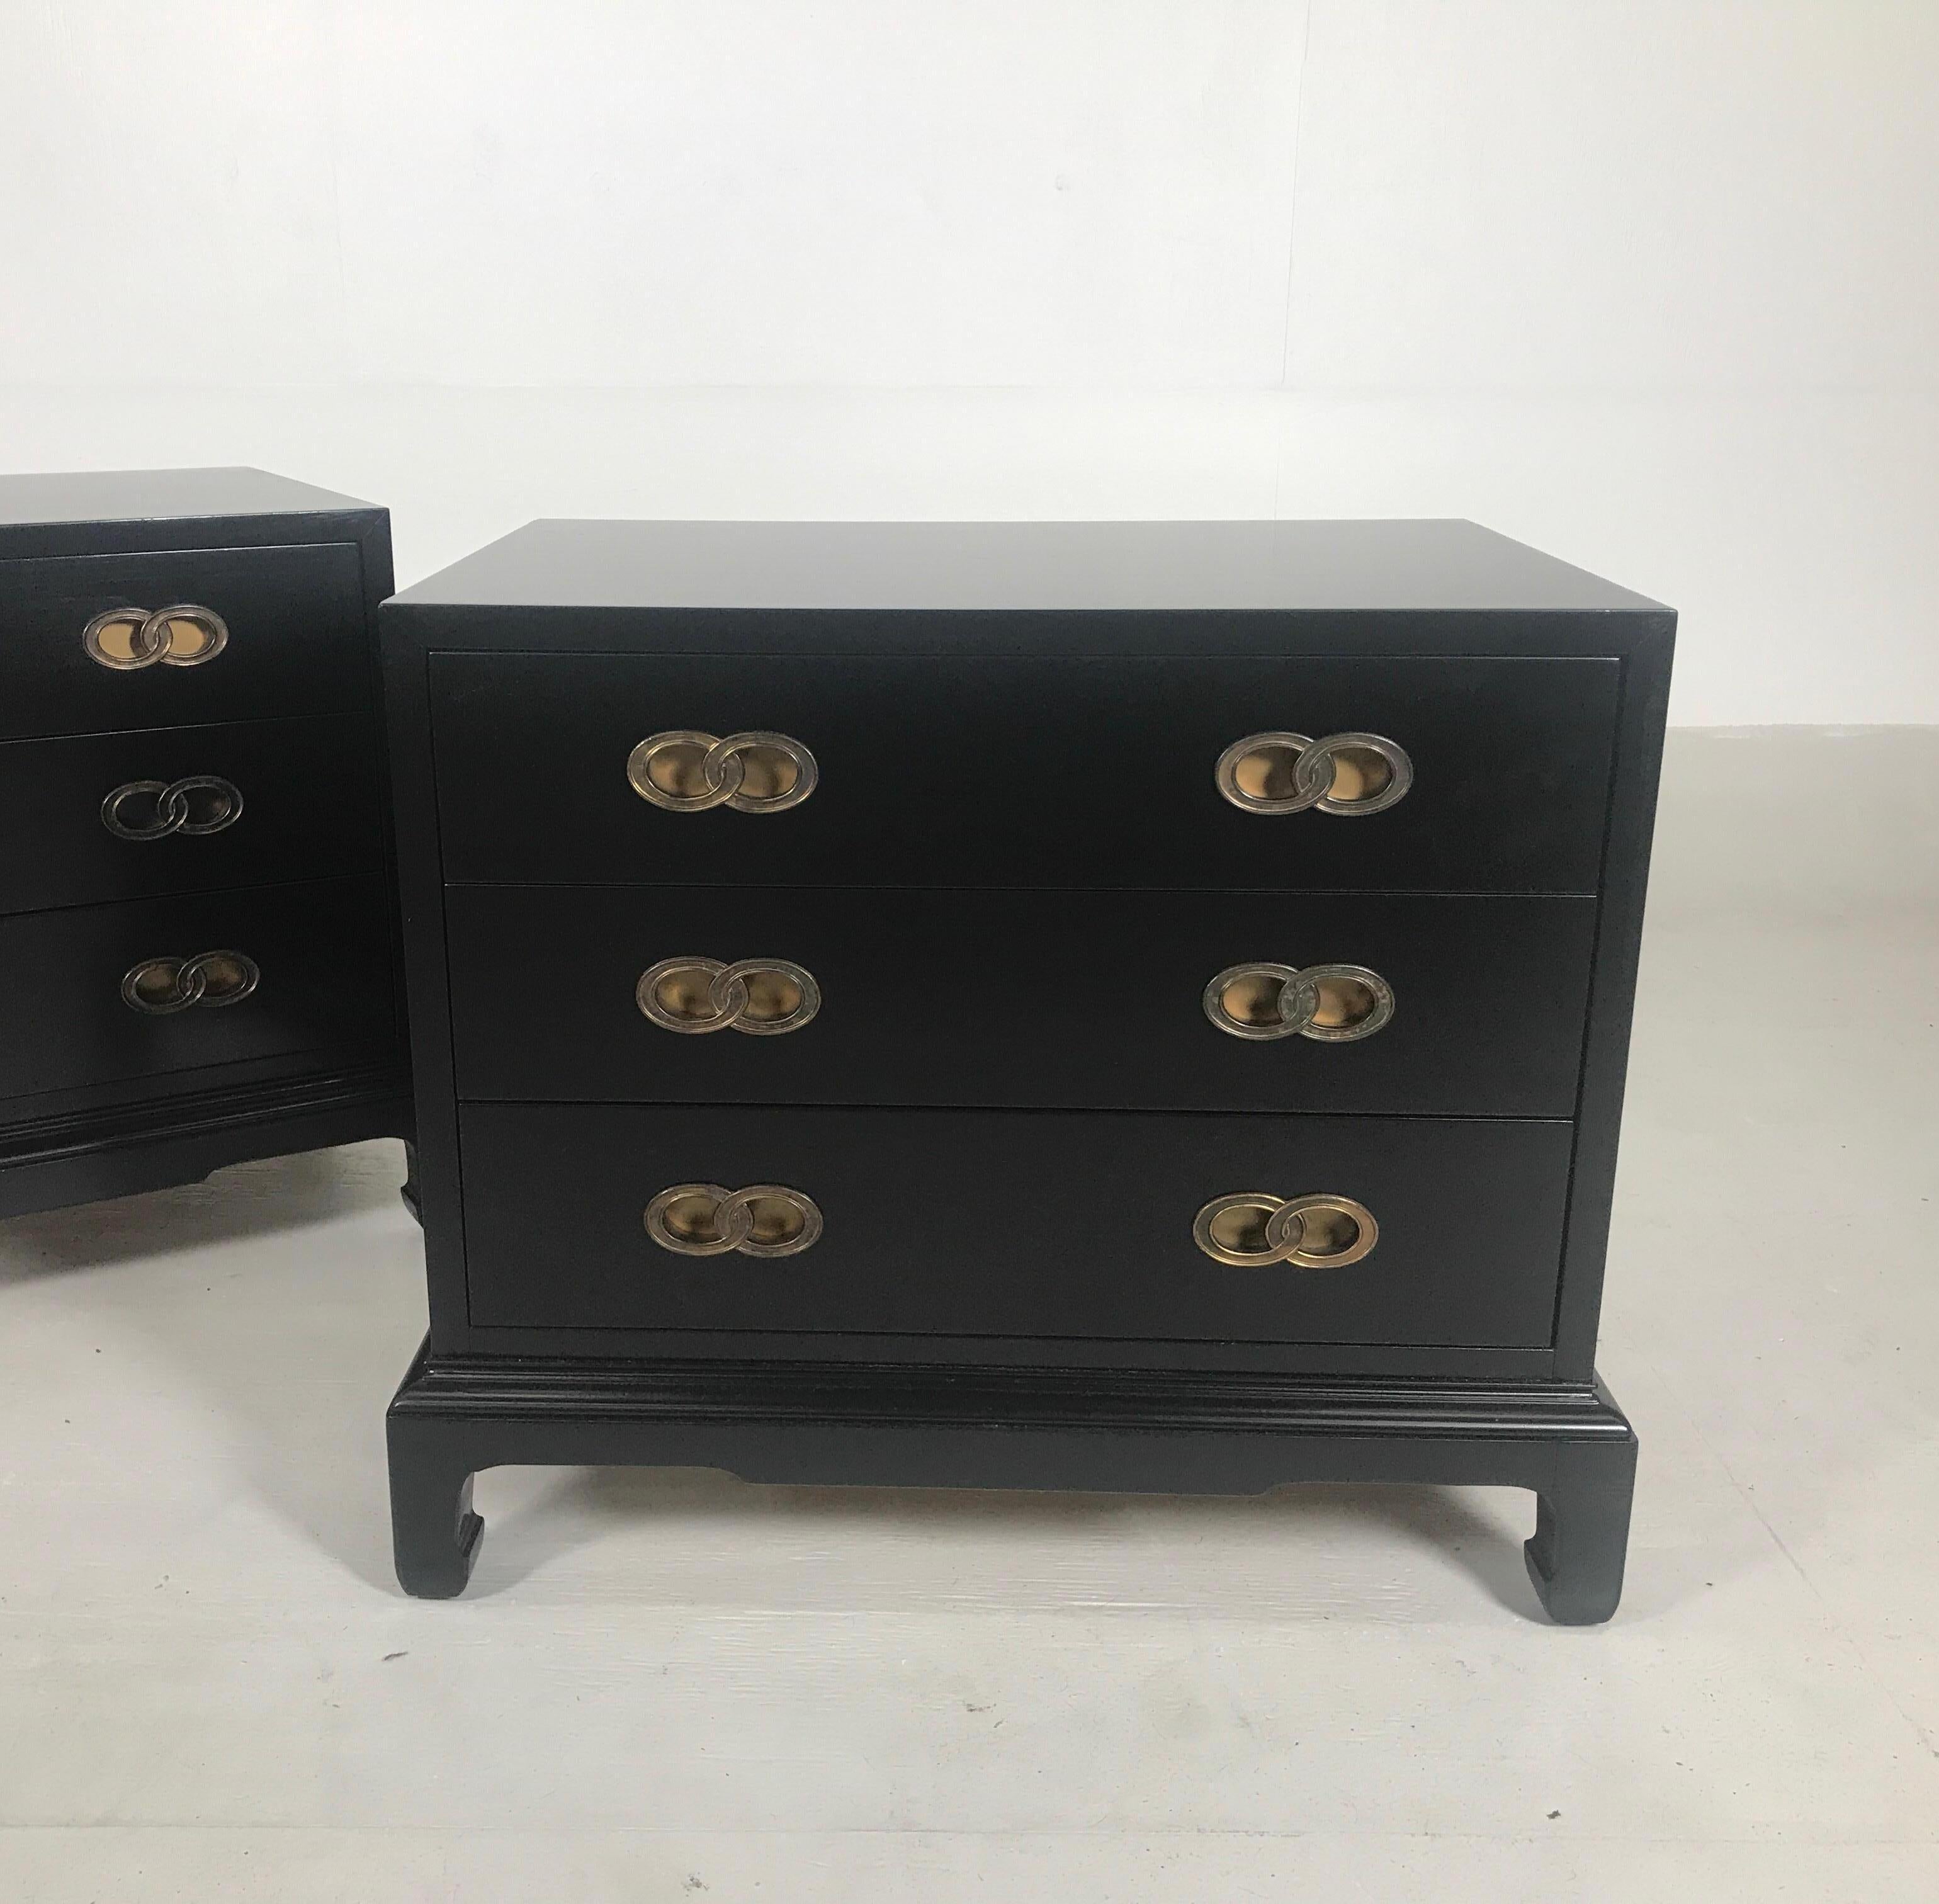 A pair of black three-drawer chests by Henredon, 1960s. The ebonized finish over solid wood with beautiful recessed double ring knot style handles. The square chests with Asian inspired James Mont style bases.